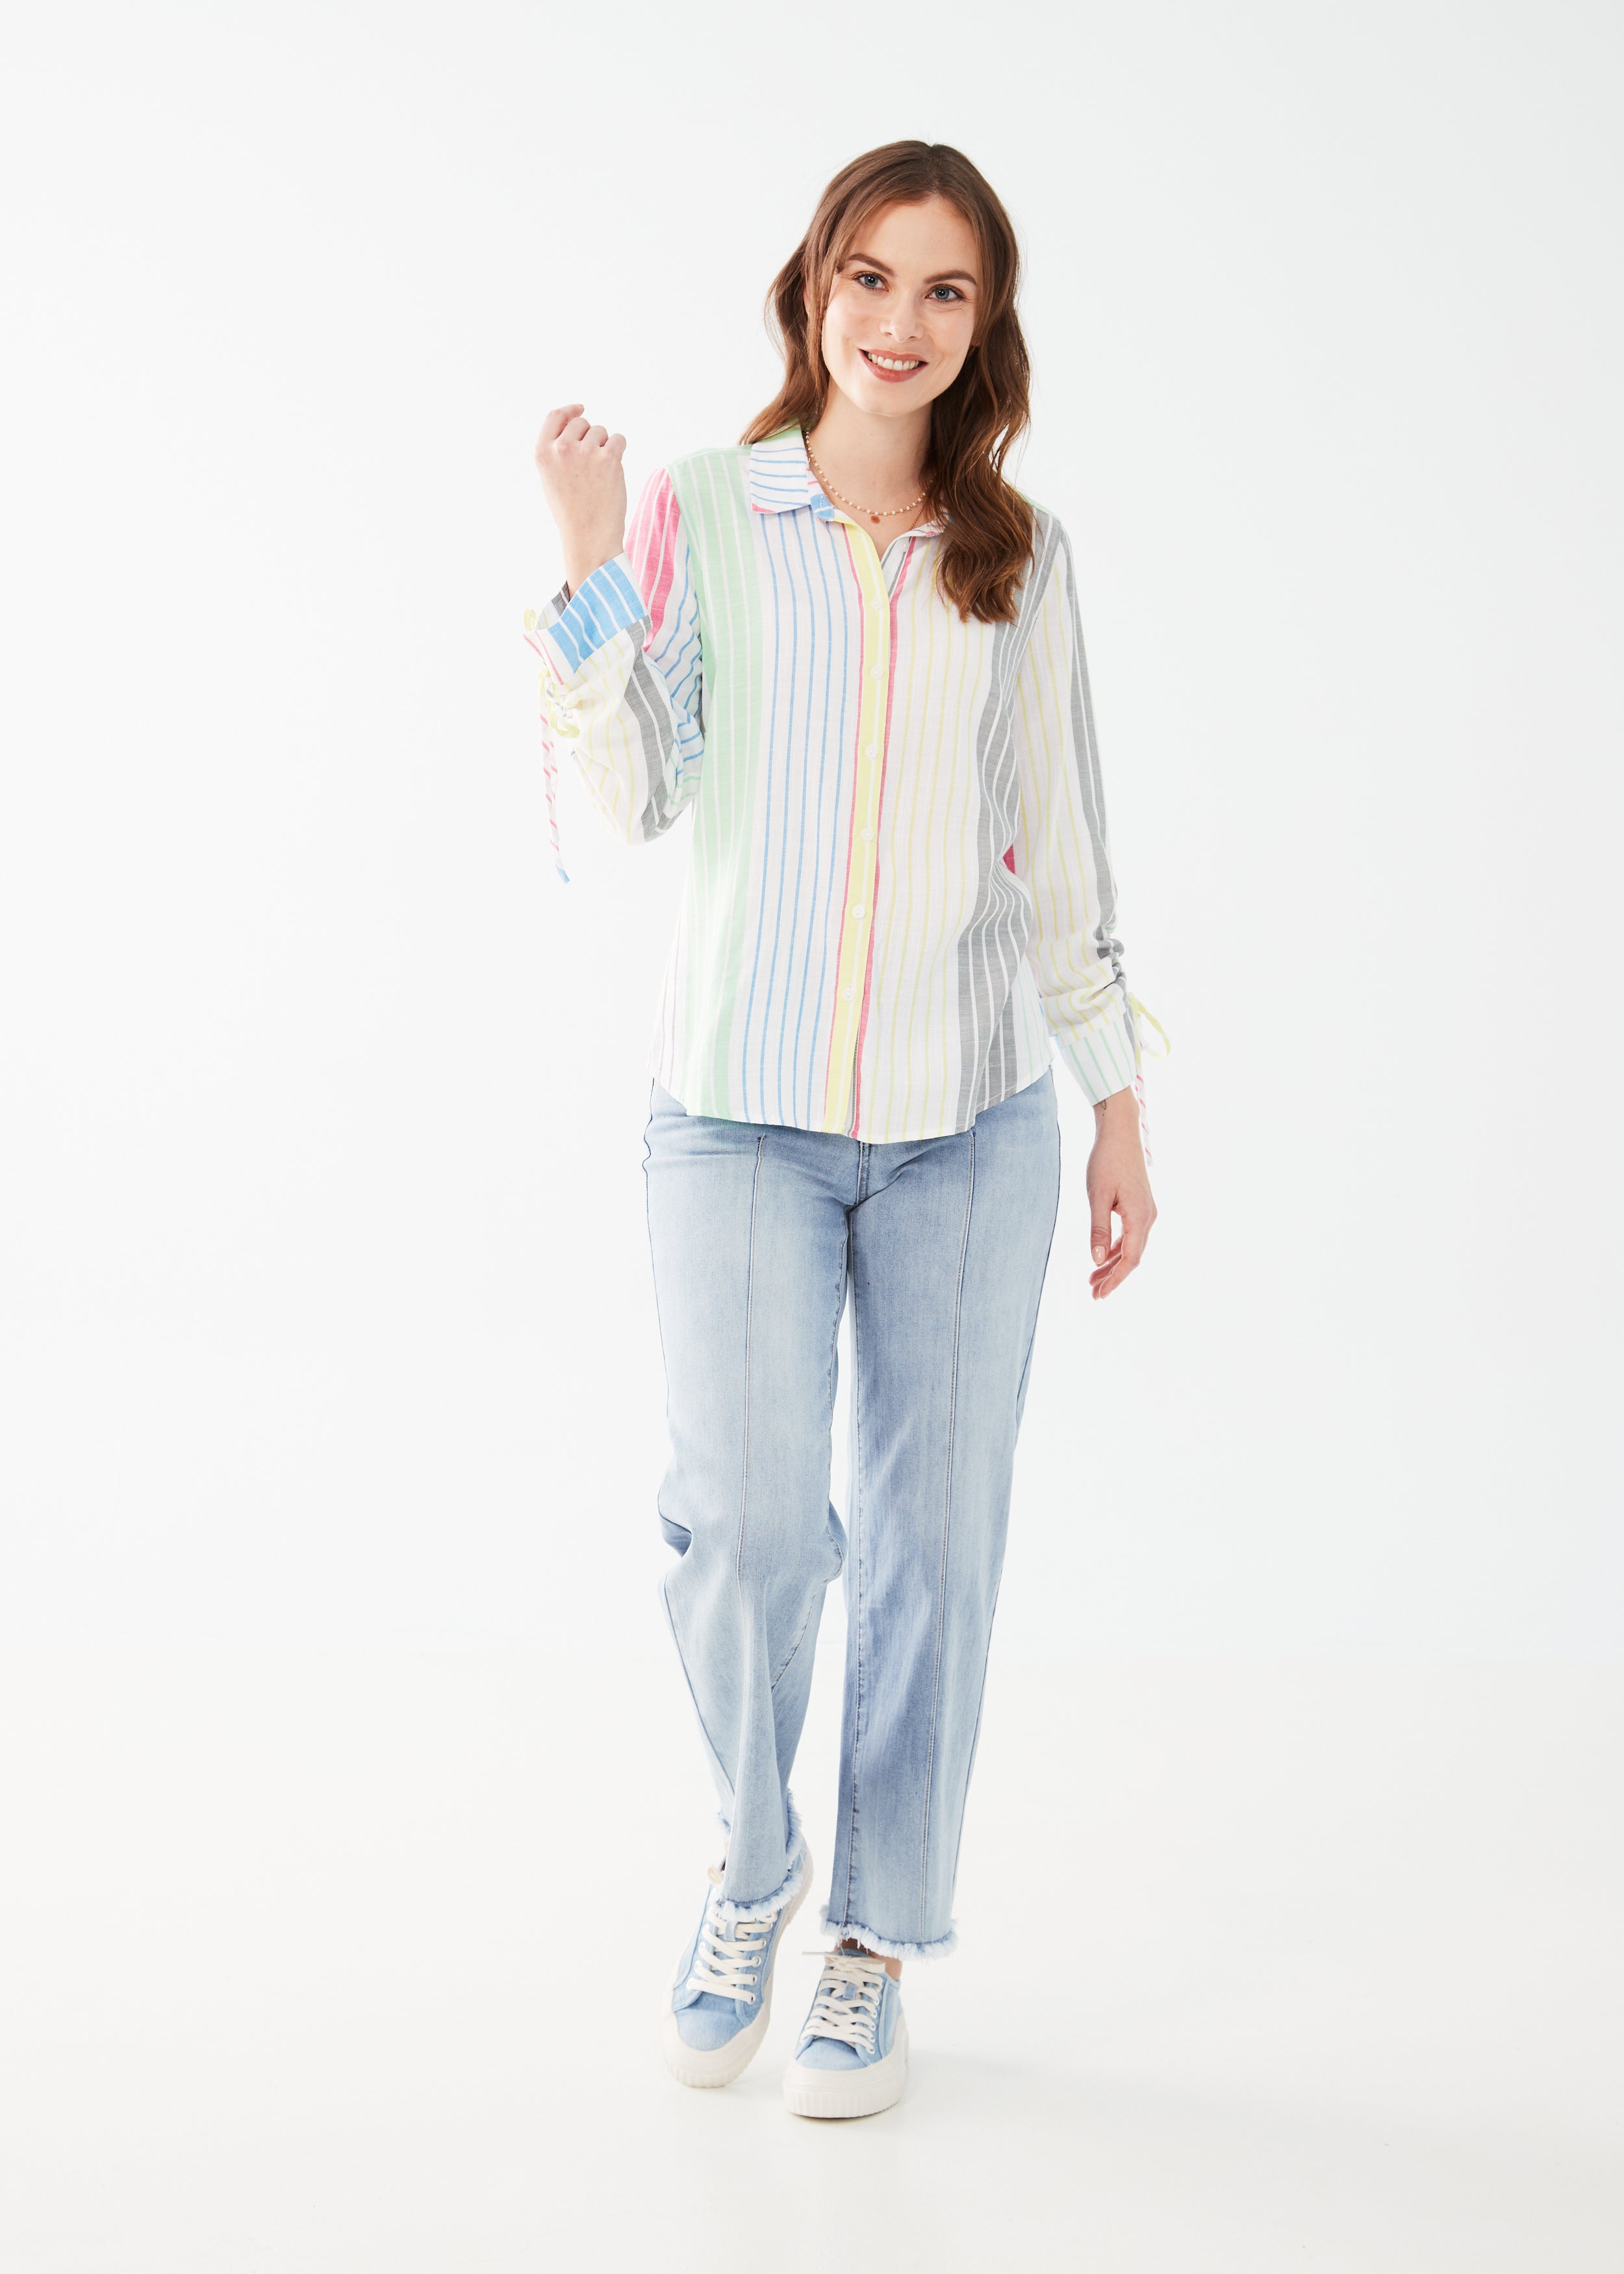 Classic Rainbow Striped Button Up Shirt by FDJ